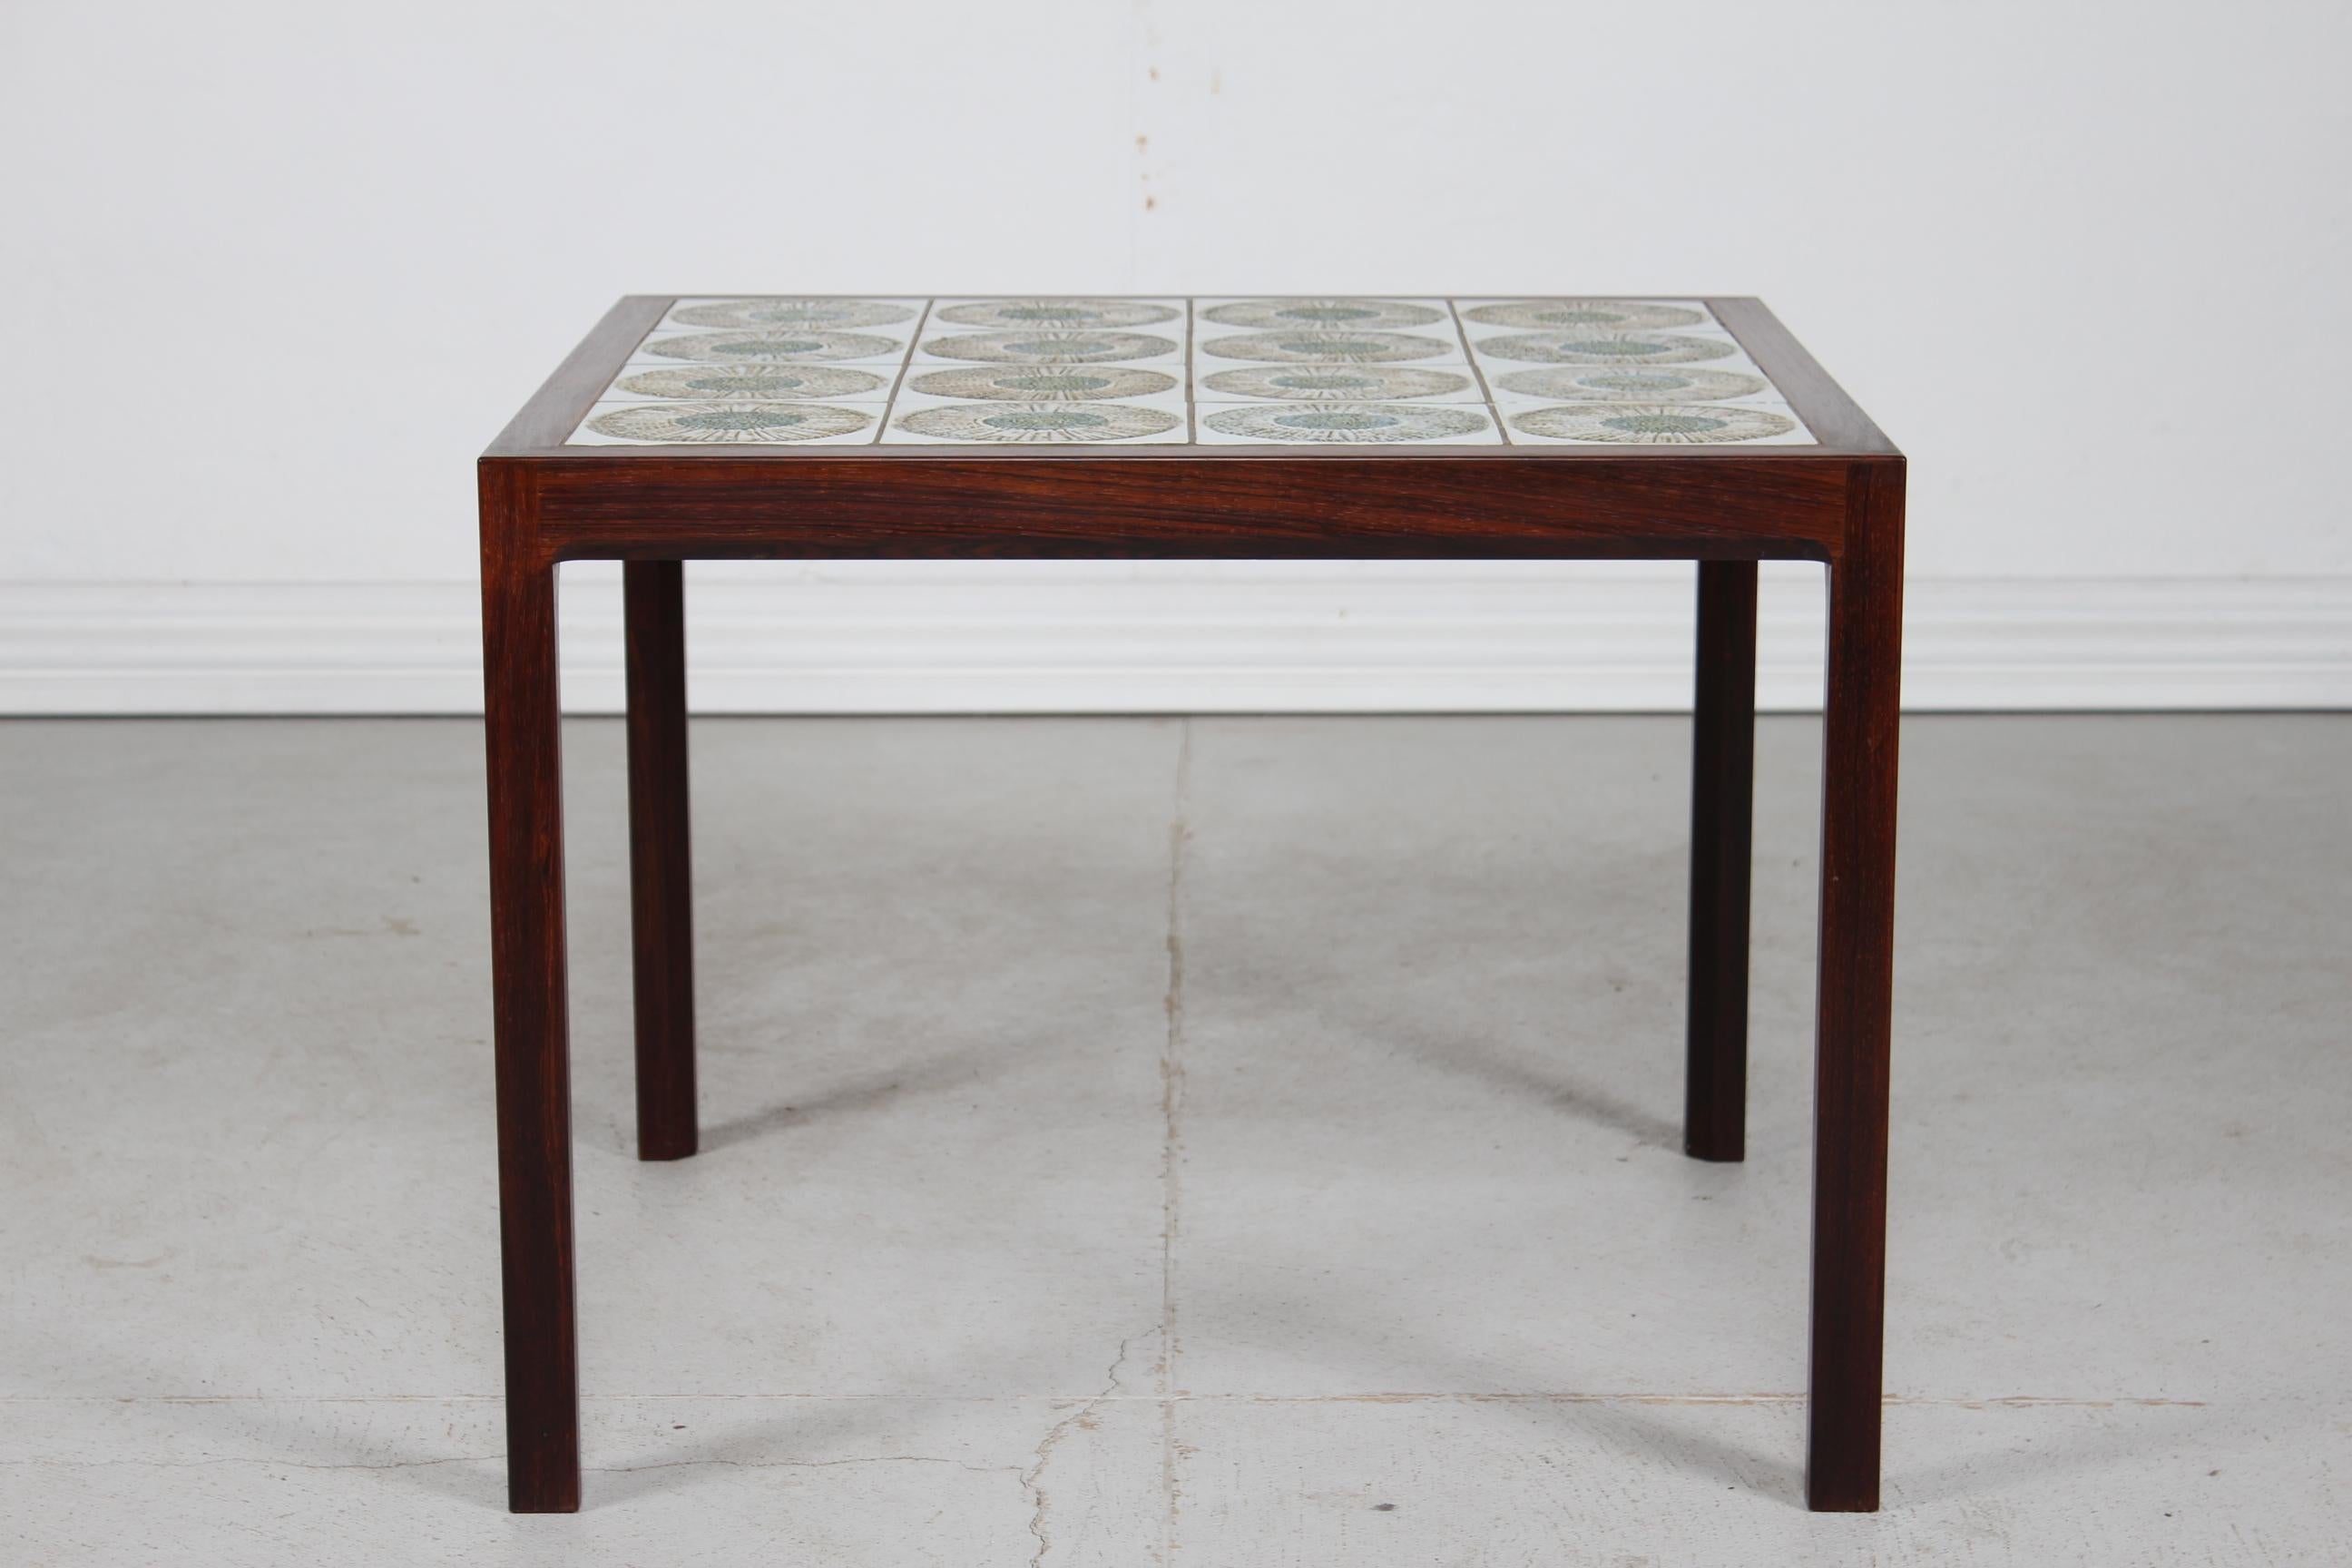 Midcentury Danish coffee table with dark wood veneer and inlaid ceramic tiles from Royal Copenhagen. Made in the 1960s.

The tiles are designed by Kari Christensen and show an abstract flower blossom decor in white, blue and brown colors. They have